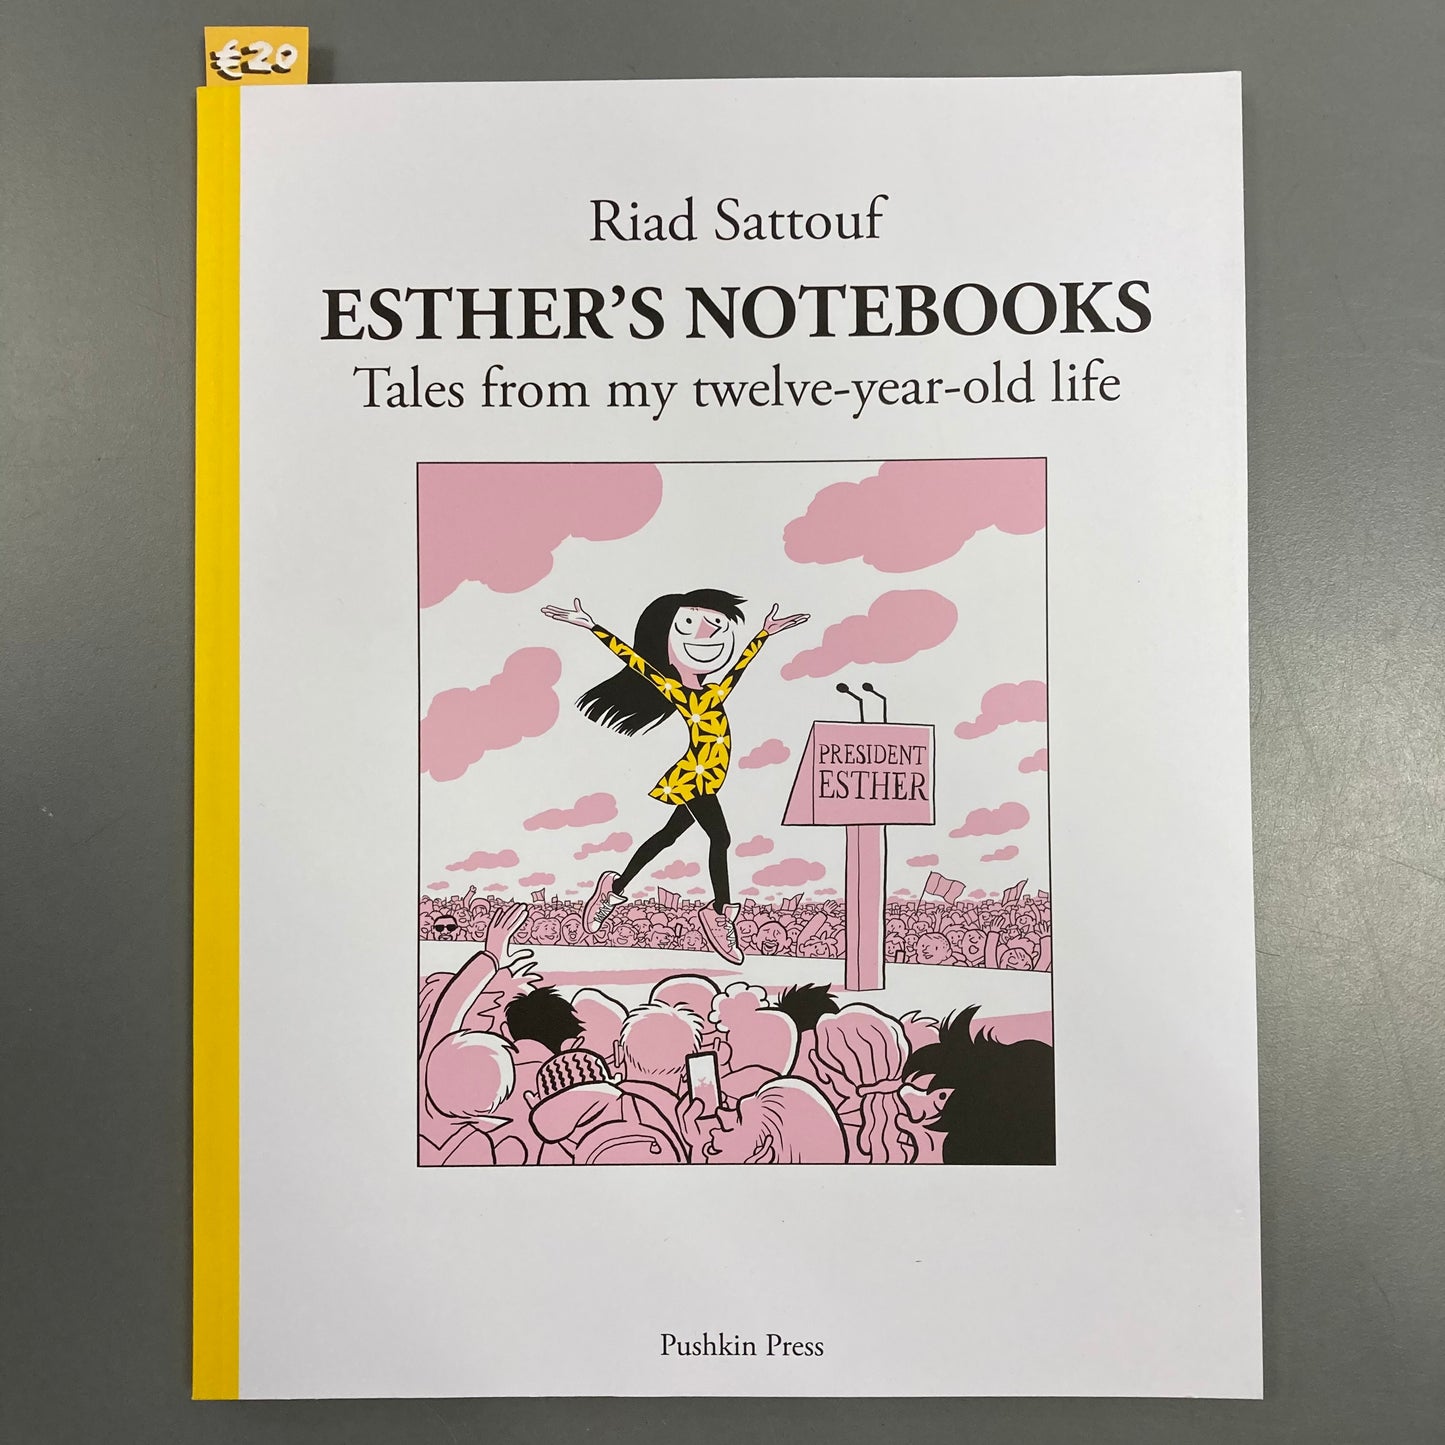 Esther's Notebooks: Tales from my twelve-year-old life